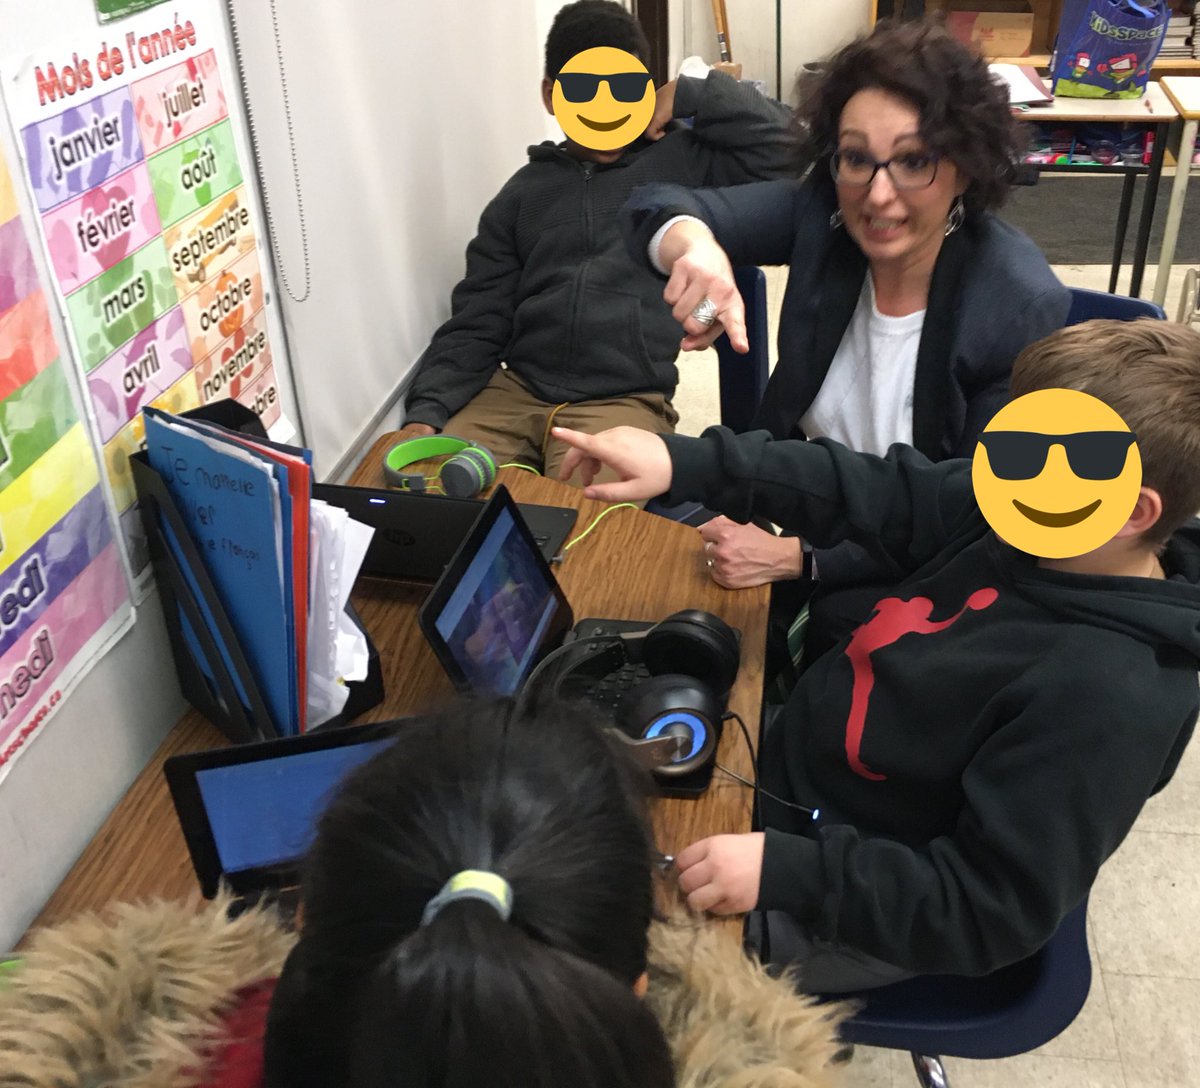 The benefits of having @GlendonCampus student teacher in #tdsbfsl =>small group instruction & support for Ss with similar needs @GenCrerar @tdsb @LC3_TDSB @CecileRobertso5 @twmckeown1 @JeannetteRebelo